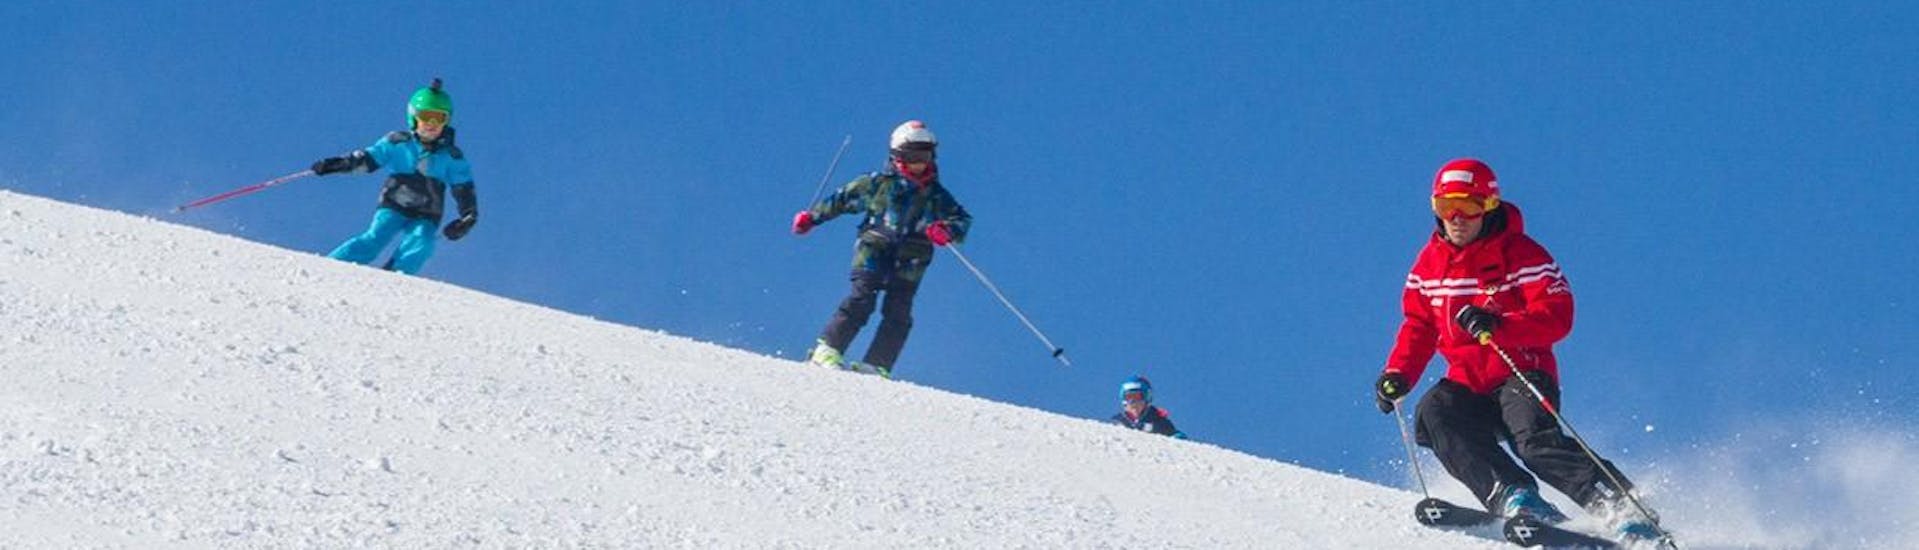 The ski instructor from Sertorelli Ski School Bormio is with the kids of the kids ski lessons with experience.